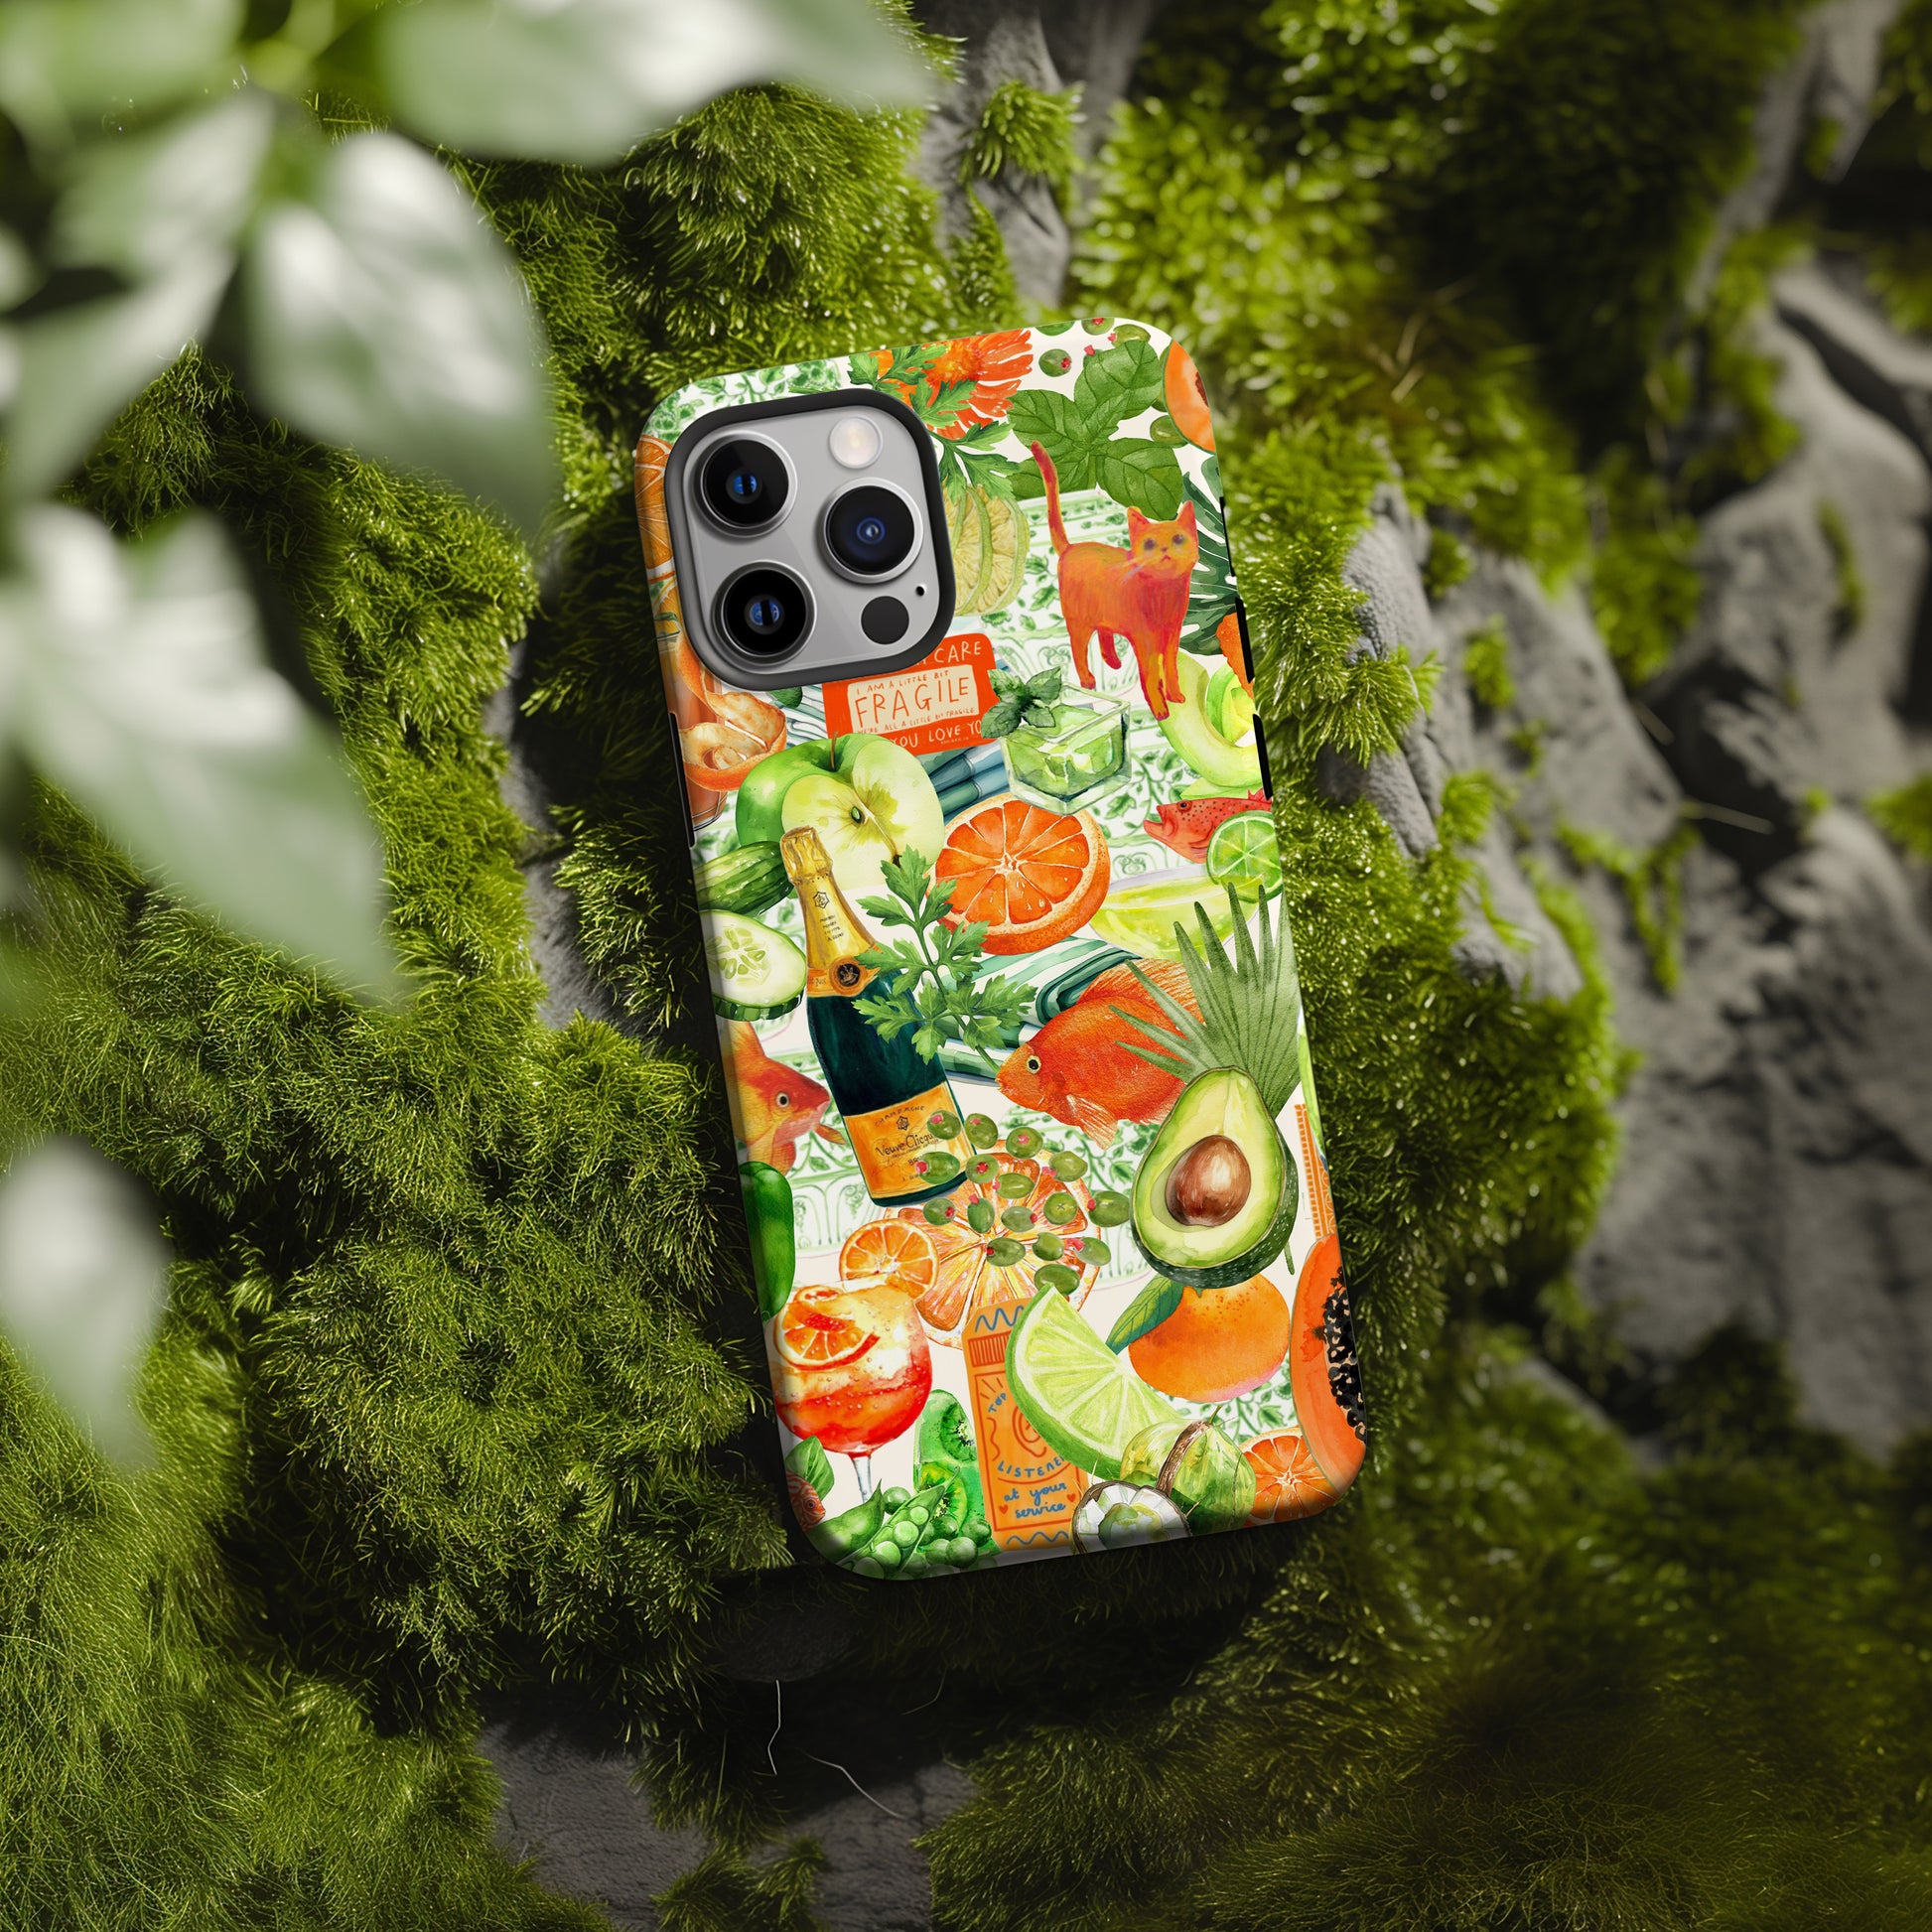 moss covered rock with Orange and Green Watercolor Collage Phone Case. Maximalist style collage phone case for iPhone and Samsung Galaxy phone. Summer phone case